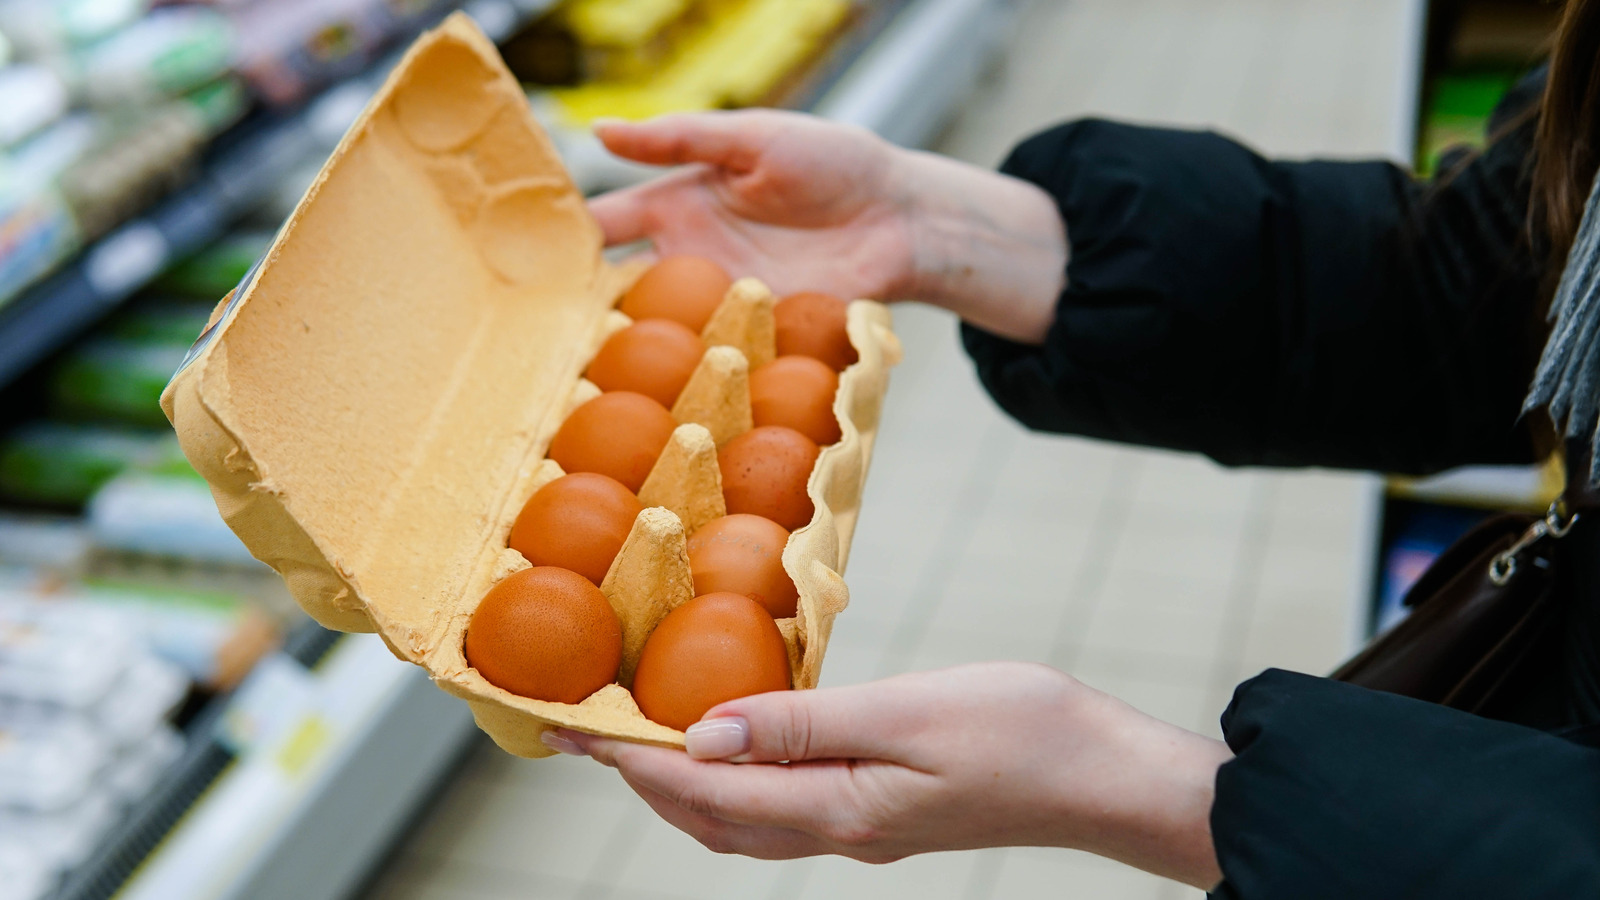 Egg Prices Might Finally Be Going Down